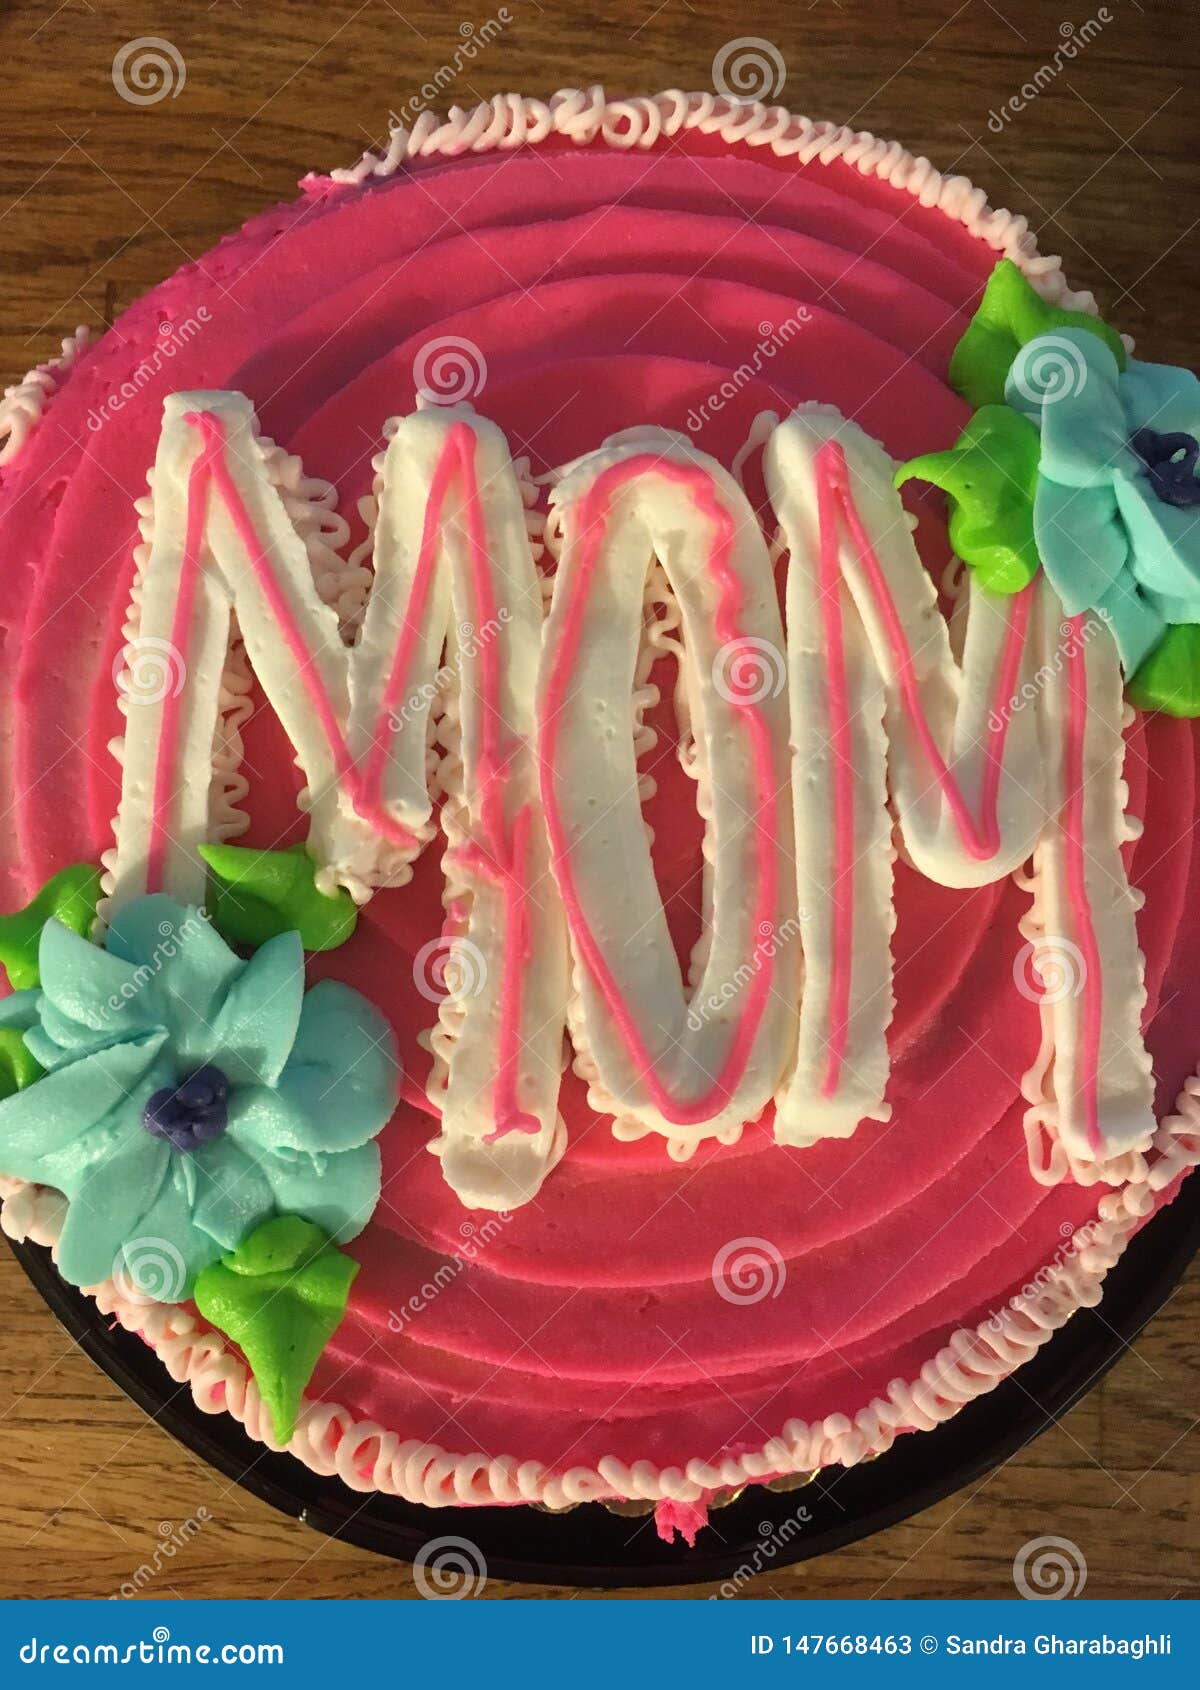 Top 5 Mother's Day Cakes to Bake for Mom - Cake by Courtney